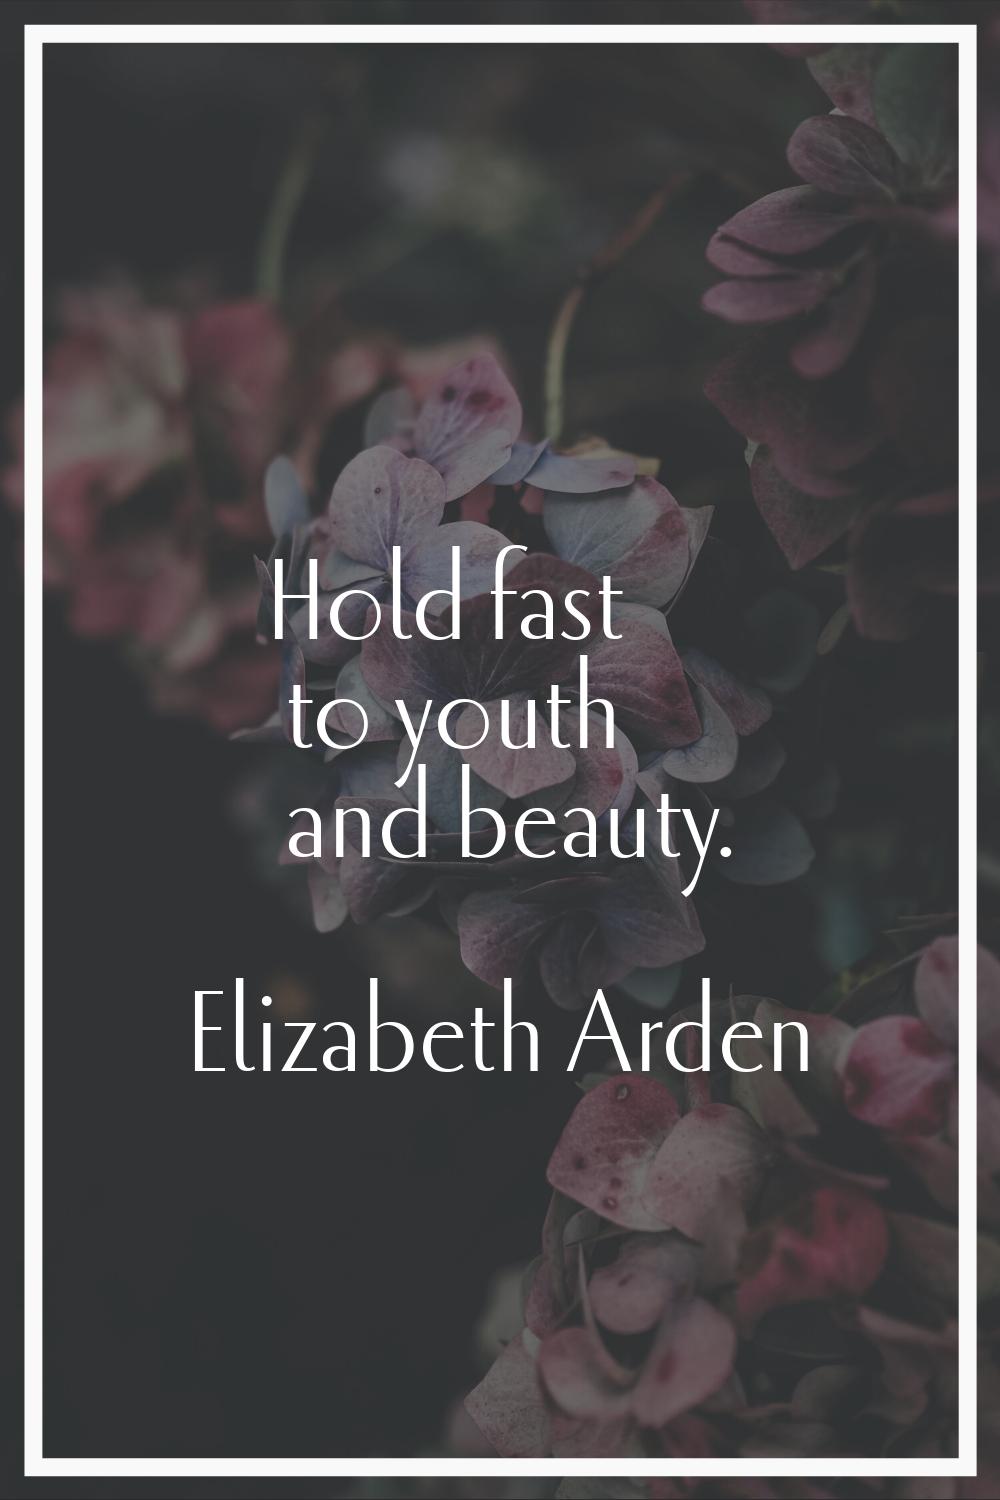 Hold fast to youth and beauty.